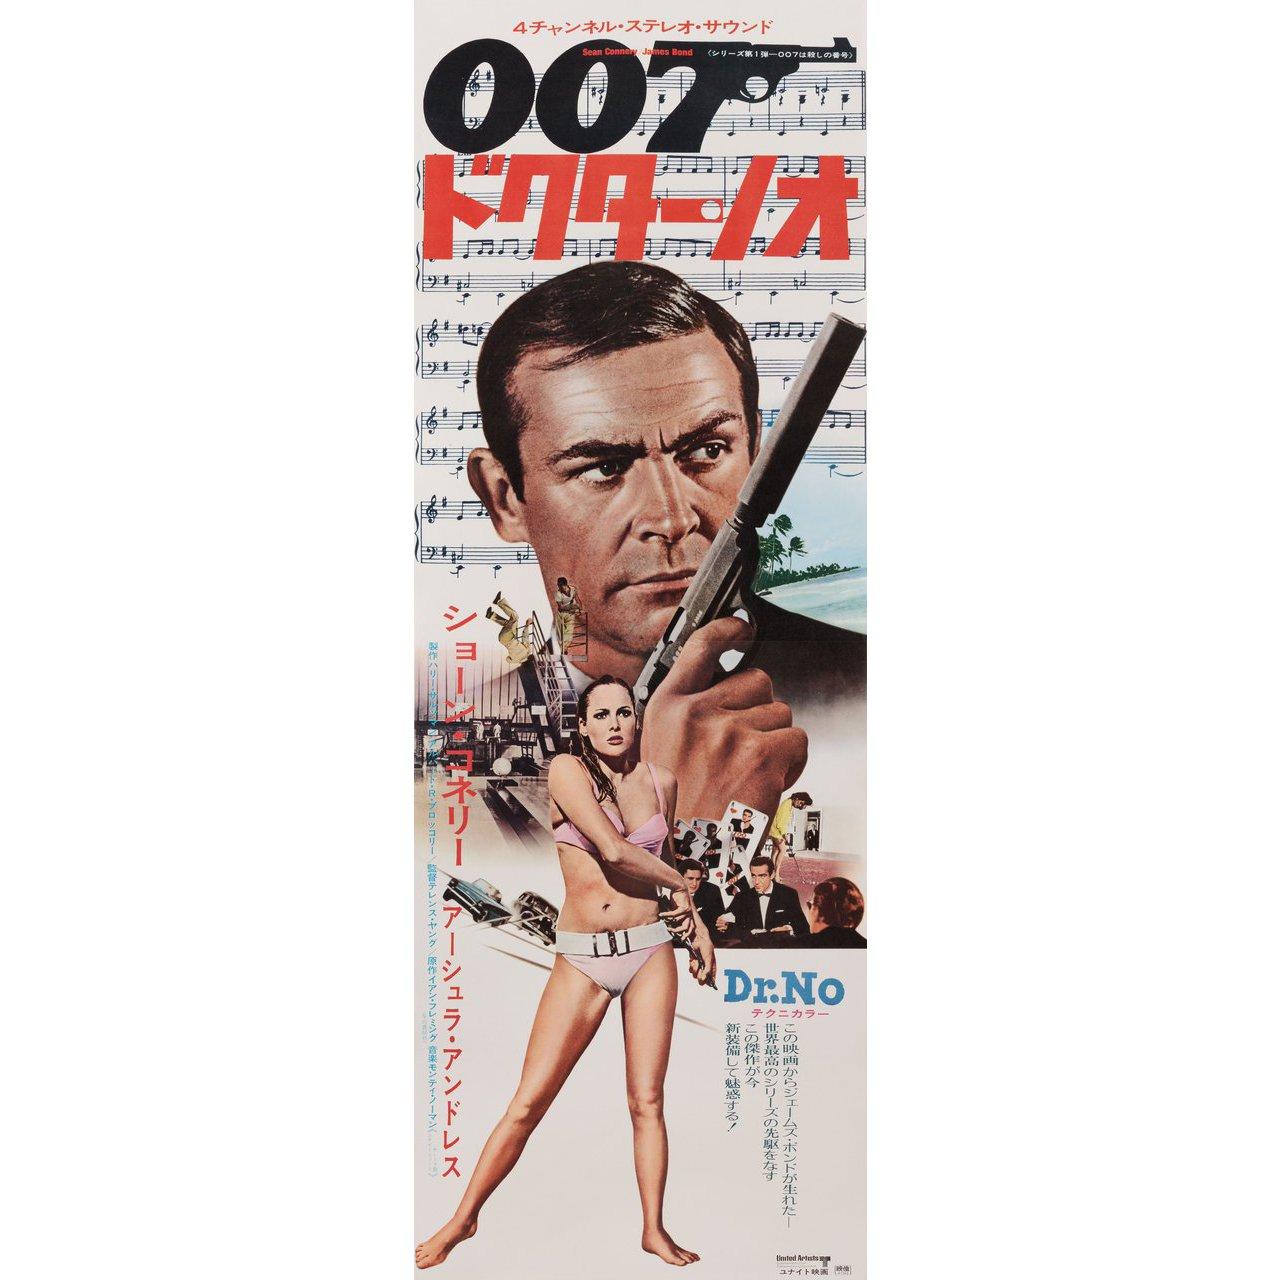 Original 1972 re-release Japanese STB tatekan poster for the 1962 film Dr. No directed by Terence Young with Sean Connery / Ursula Andress / Joseph Wiseman / Jack Lord. Fine condition, linen-backed. This poster has been professionally linen-backed.